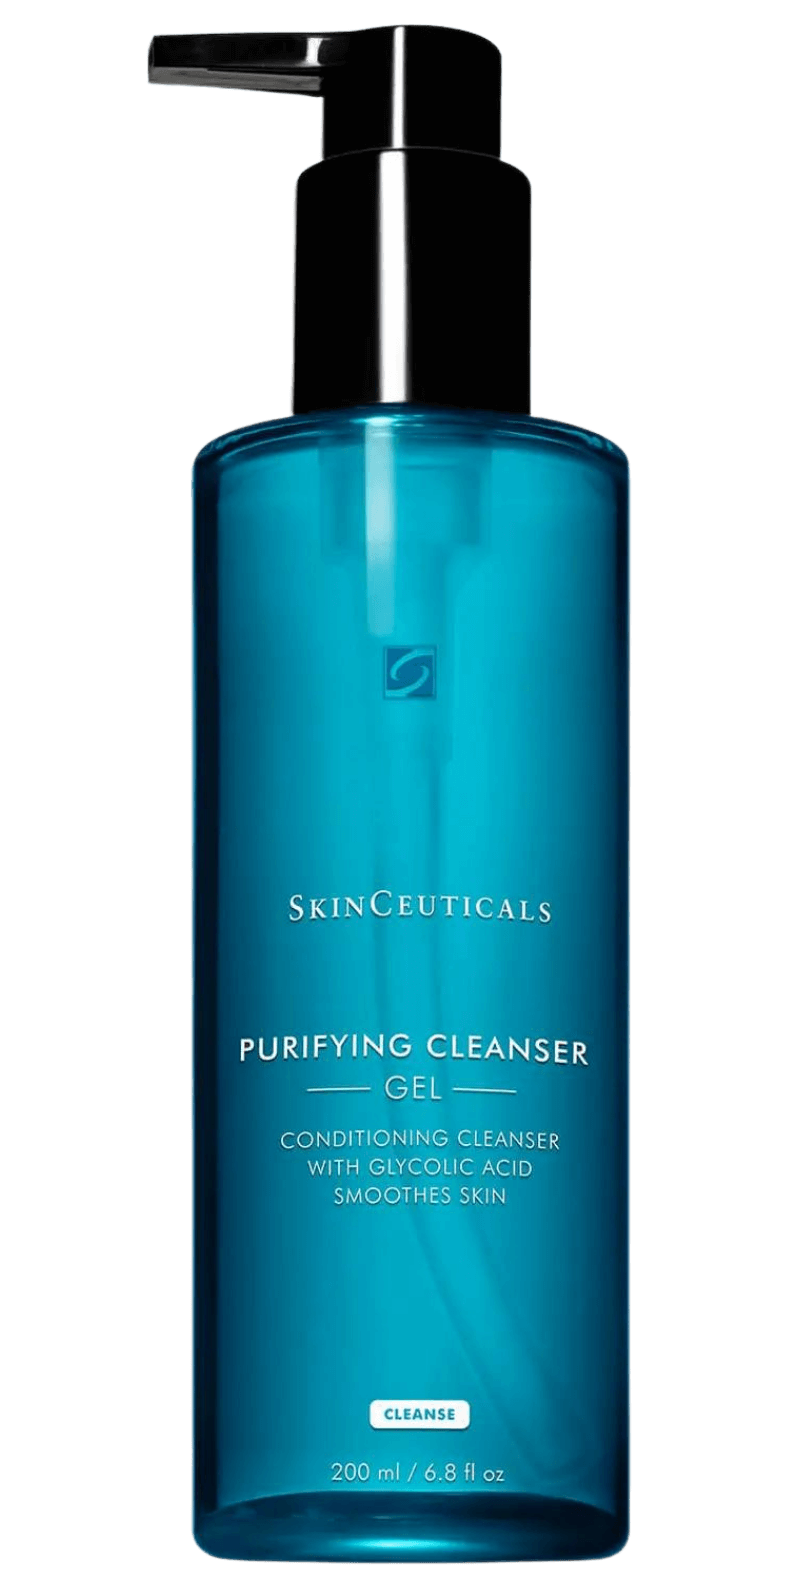 's SkinCeuticals Purifying Cleanser Gel - Bellini's Skin and Parfumerie 